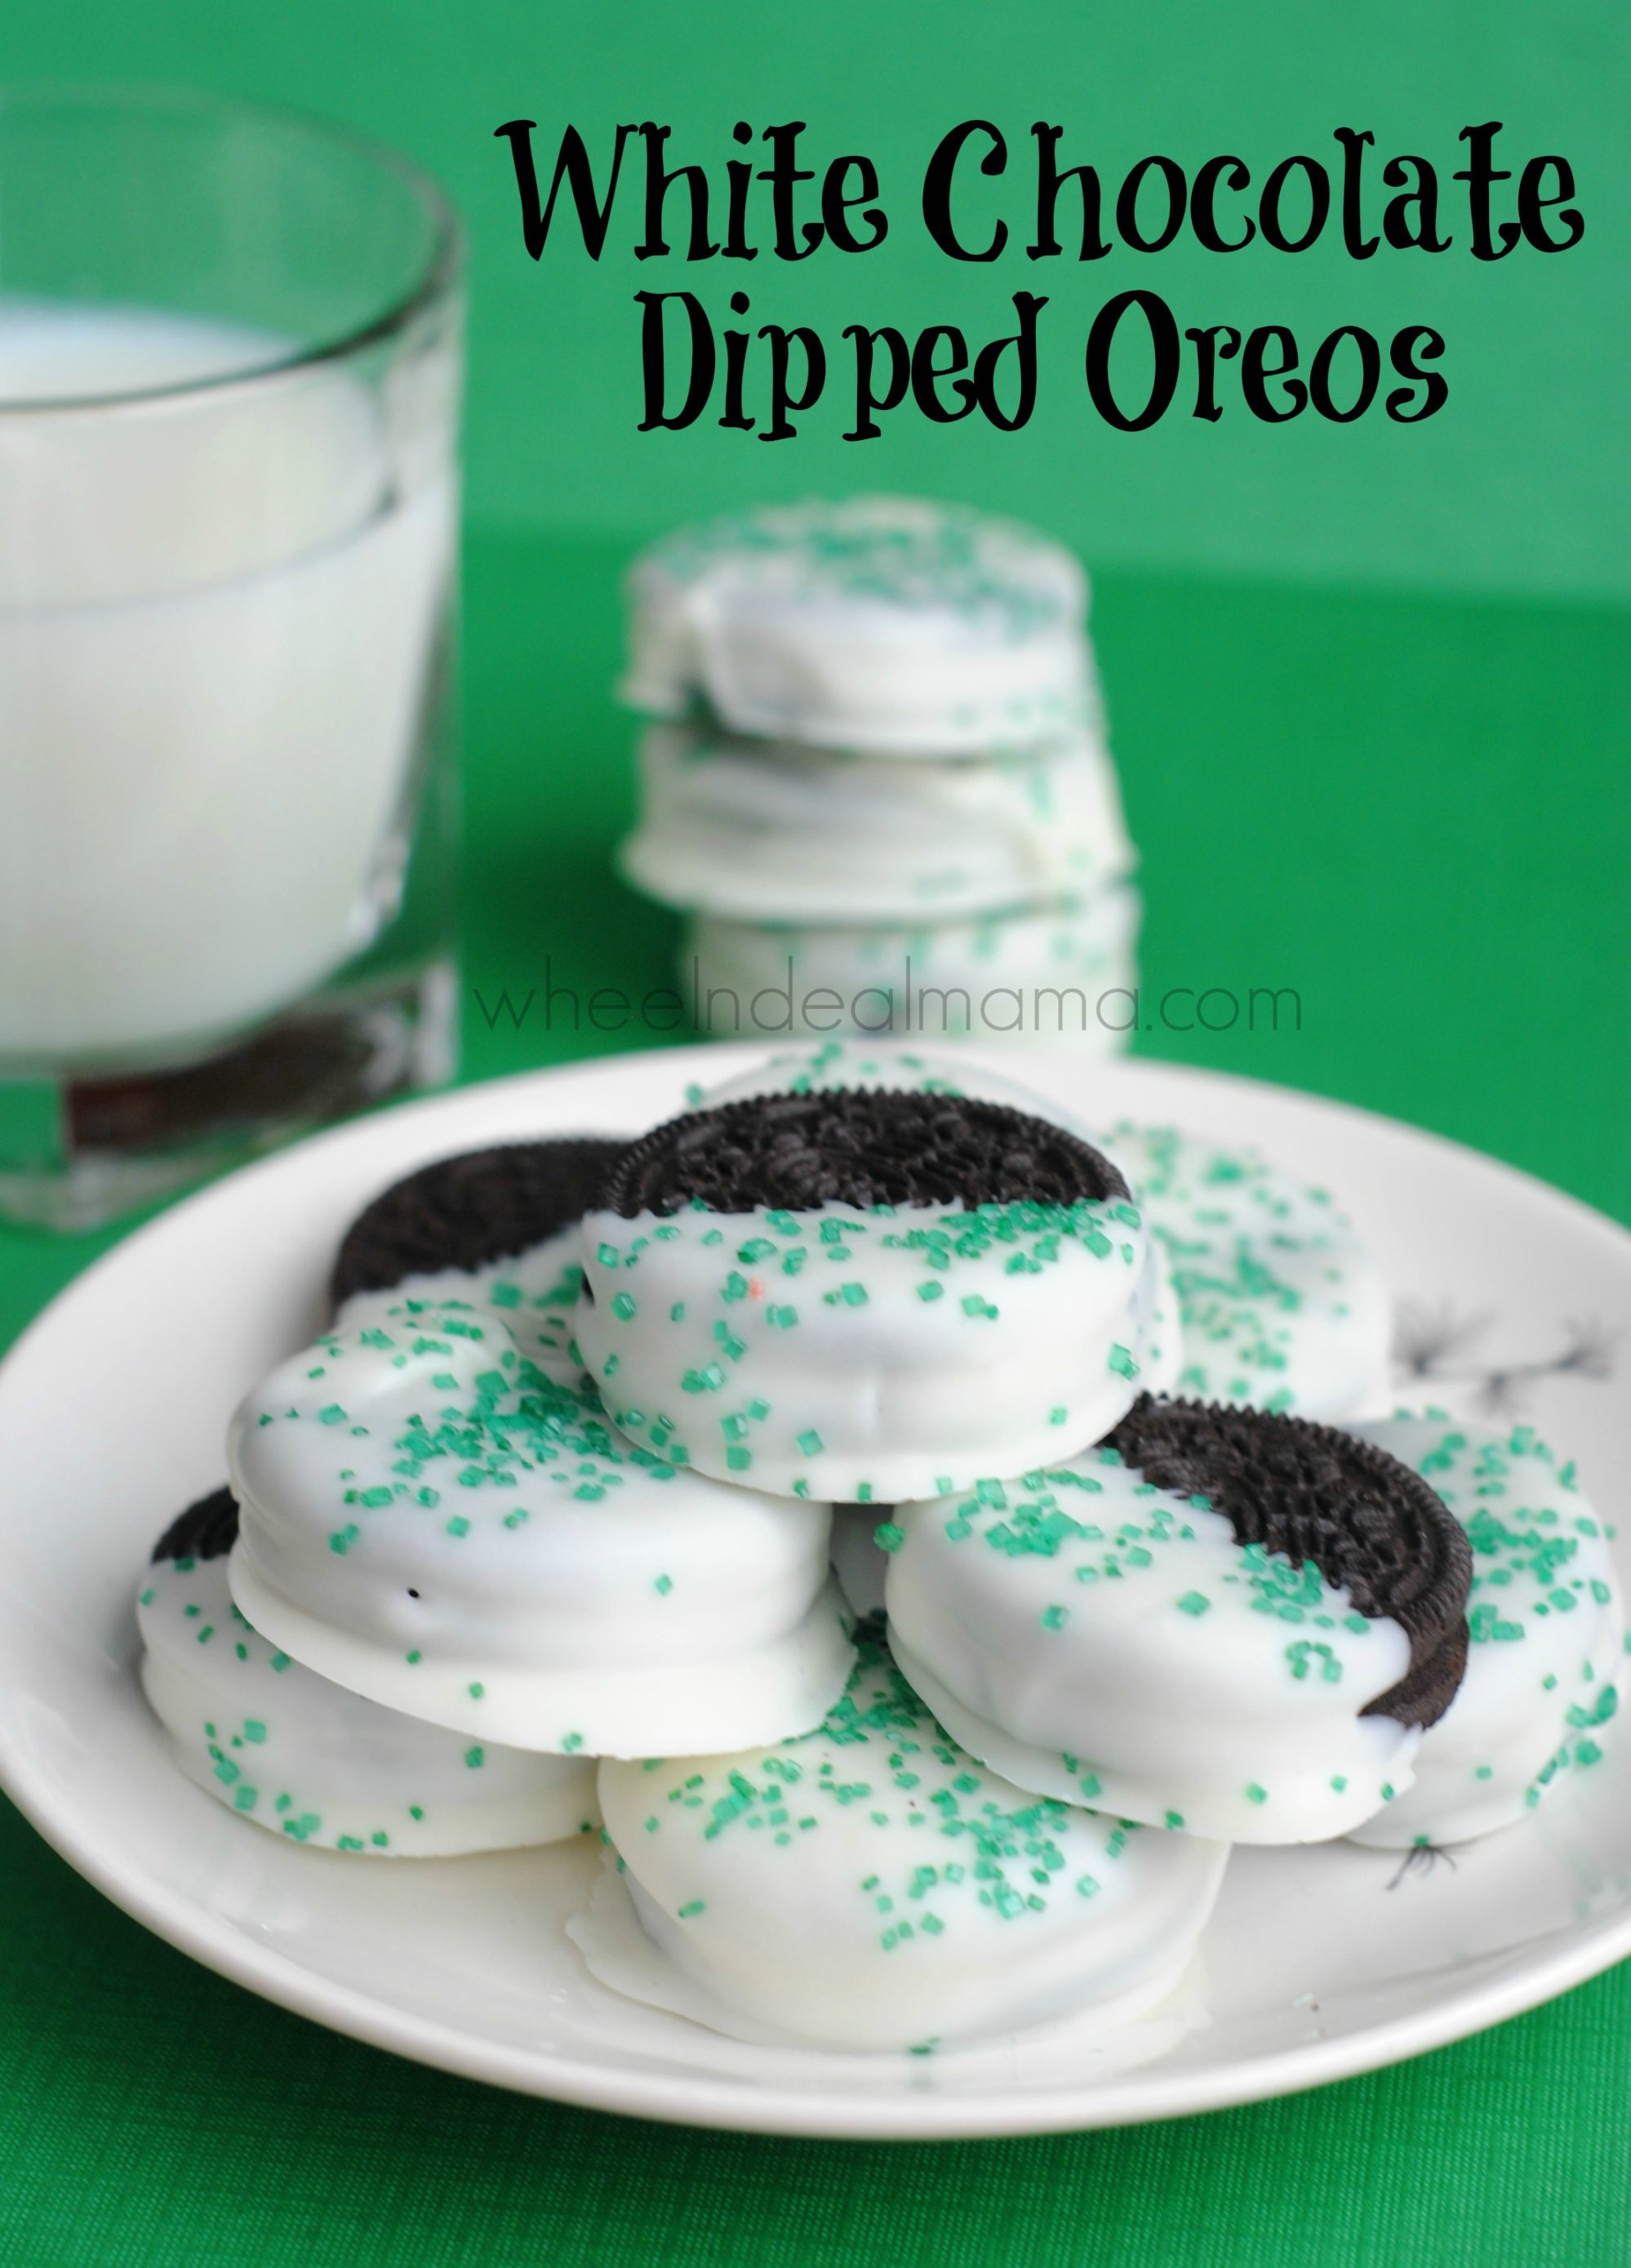 White Chocolate Dipped Oreos With Sprinkles Wheel N Deal Mama,Easy Meatball Recipe